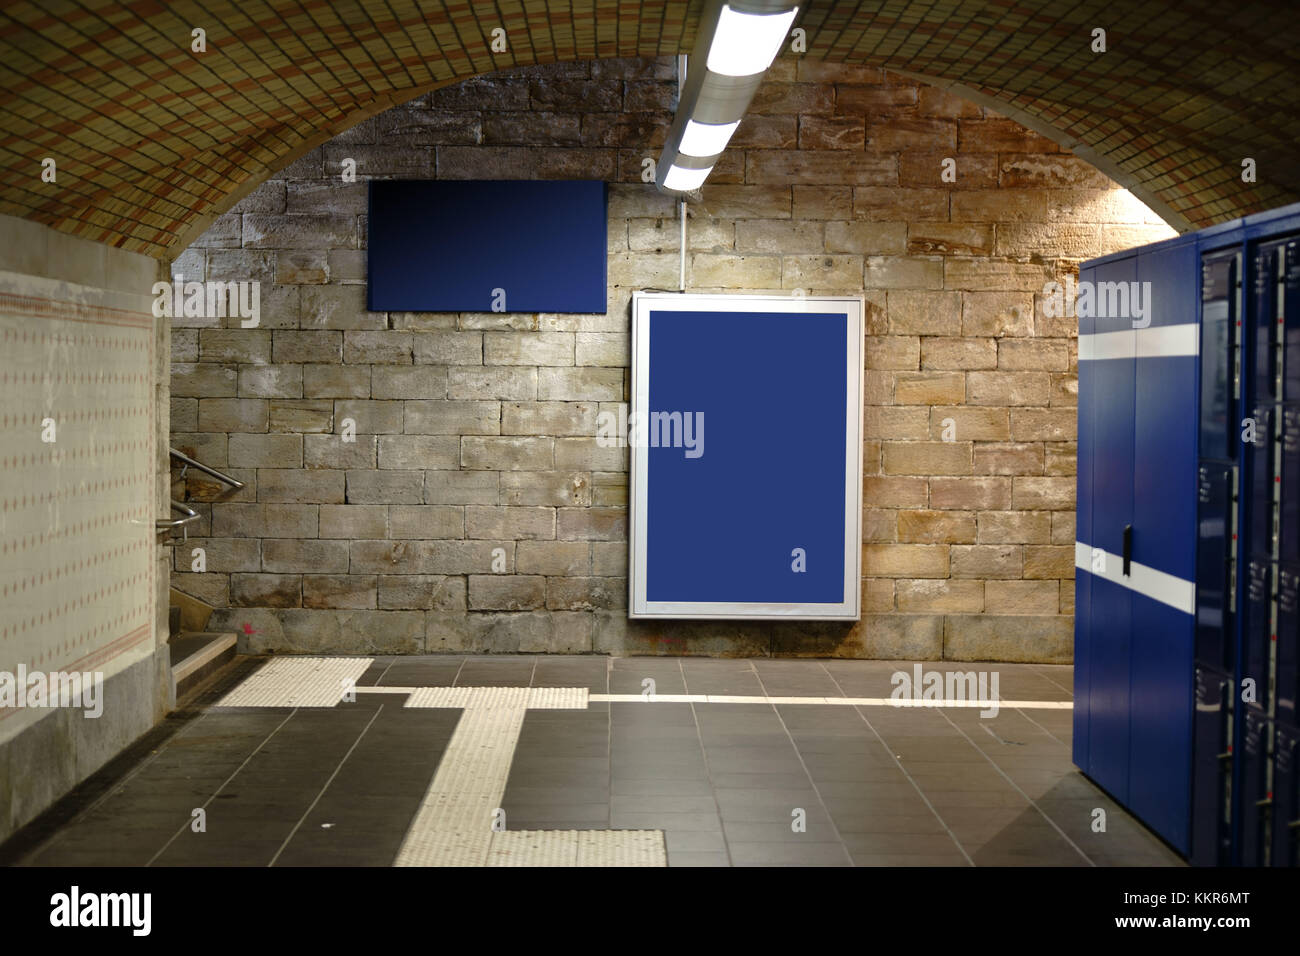 An illuminateded and tiled railway station tunnel with ceiling lamps and frames for advertising poster. Stock Photo